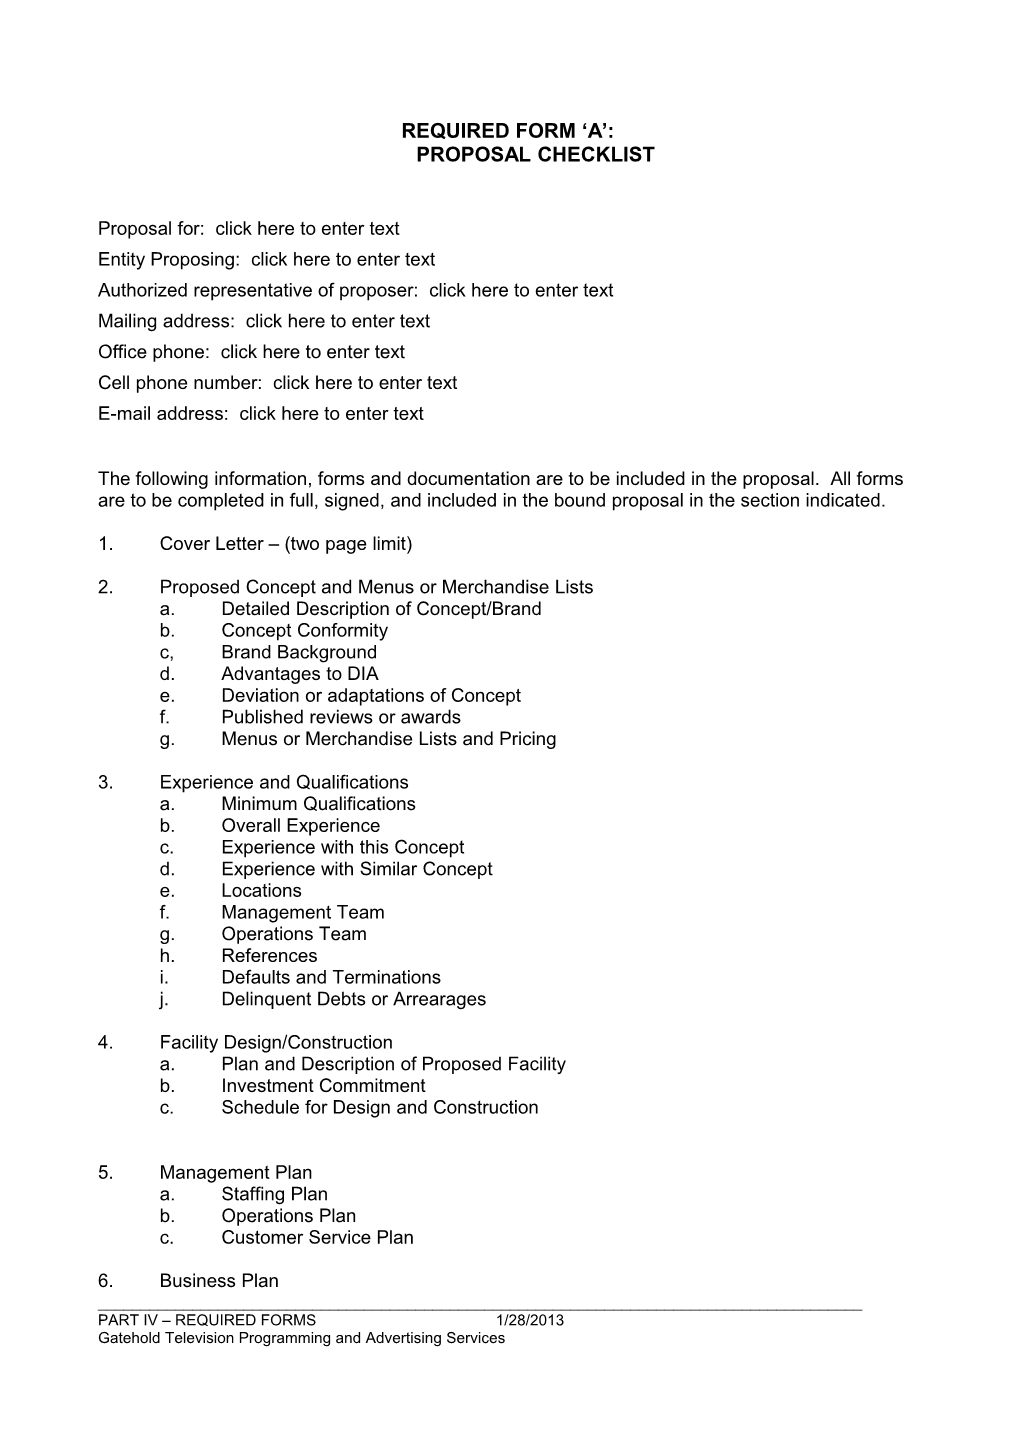 Required Form a : Proposal Checklist